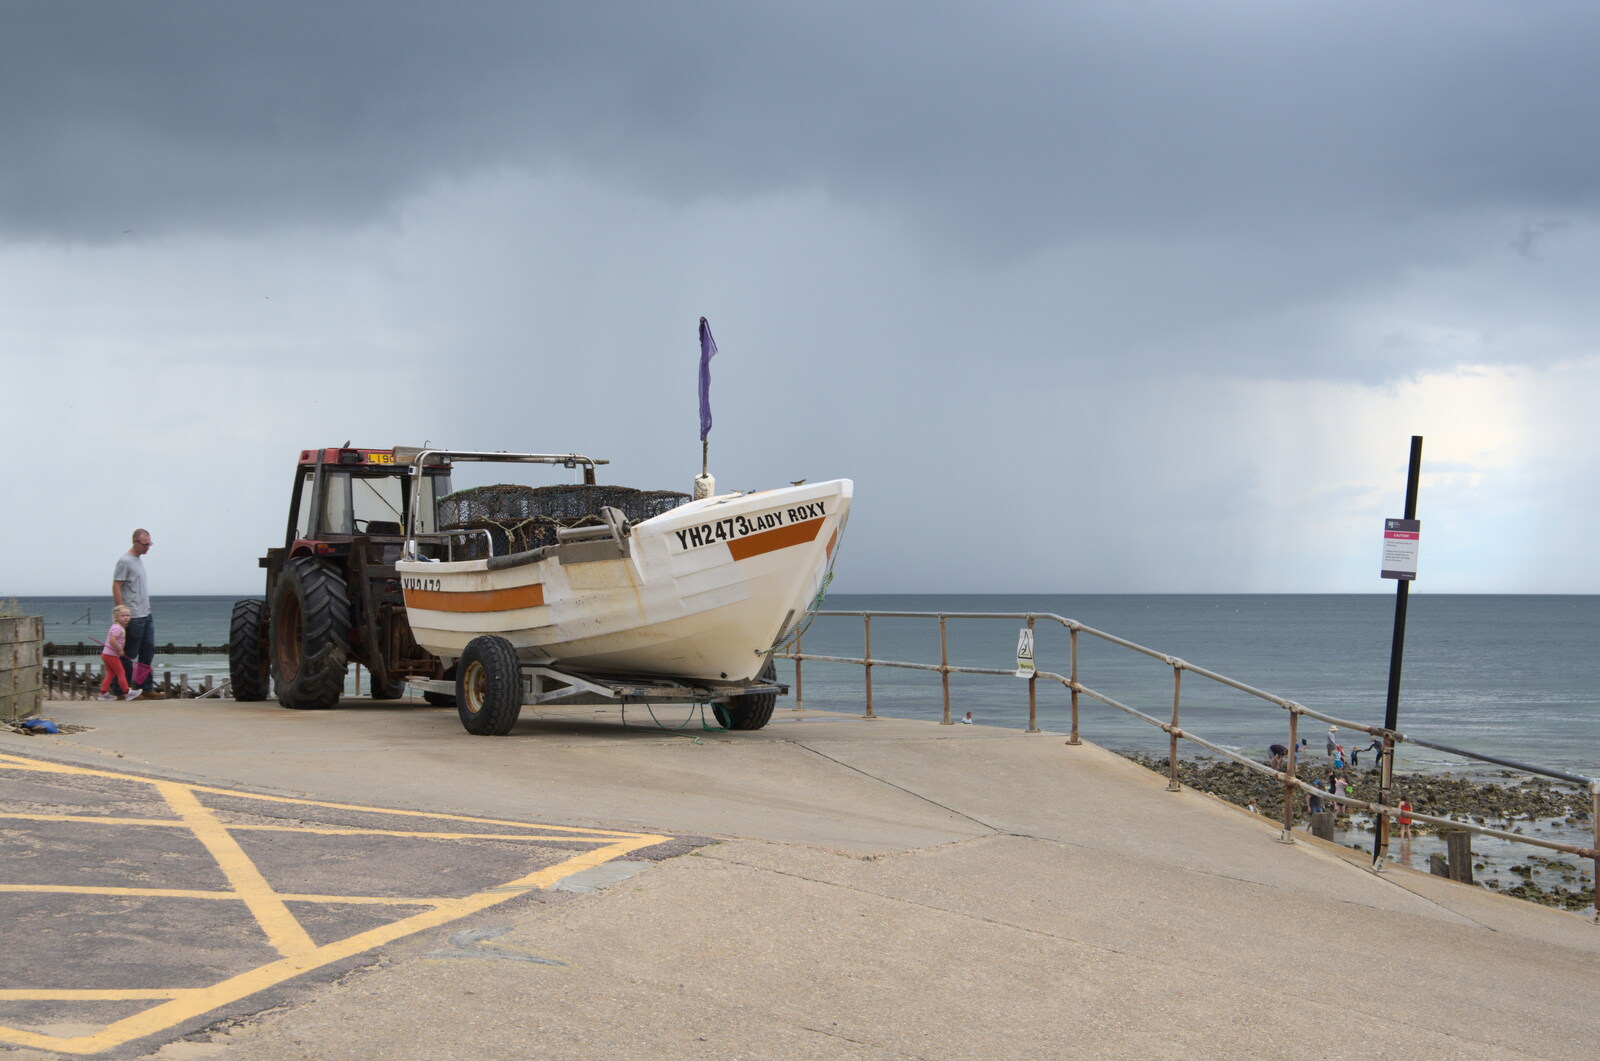 The Lady Roxy fishing boat, and rainy skies from Camping on the Coast, East Runton, North Norfolk - 25th July 2020